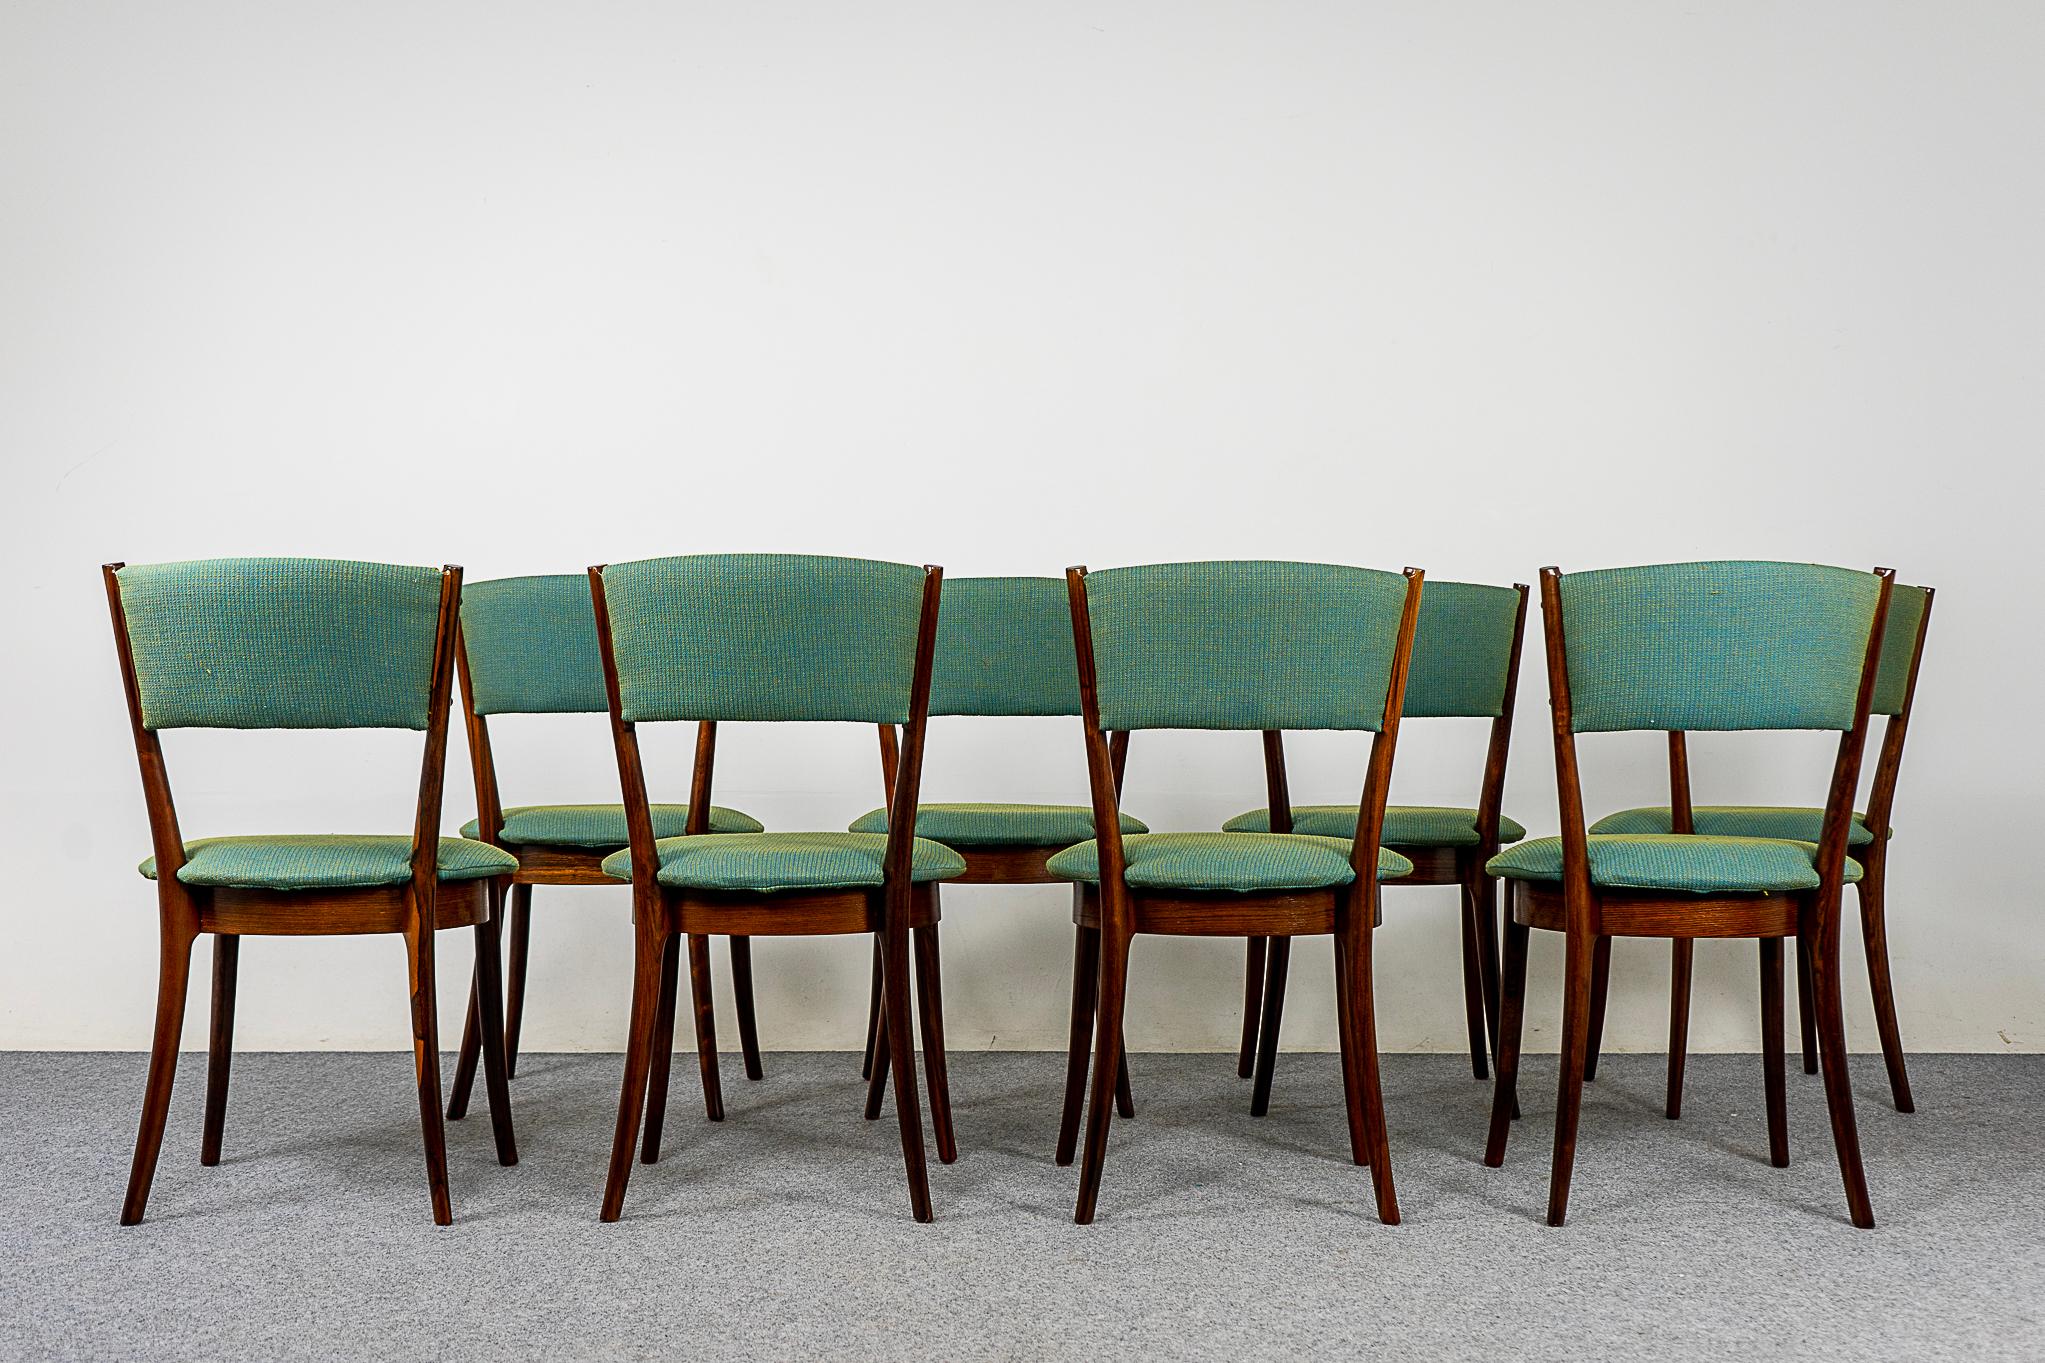 Set of 8 Danish Mid-Century Modern Rosewood Dining Chairs For Sale 5